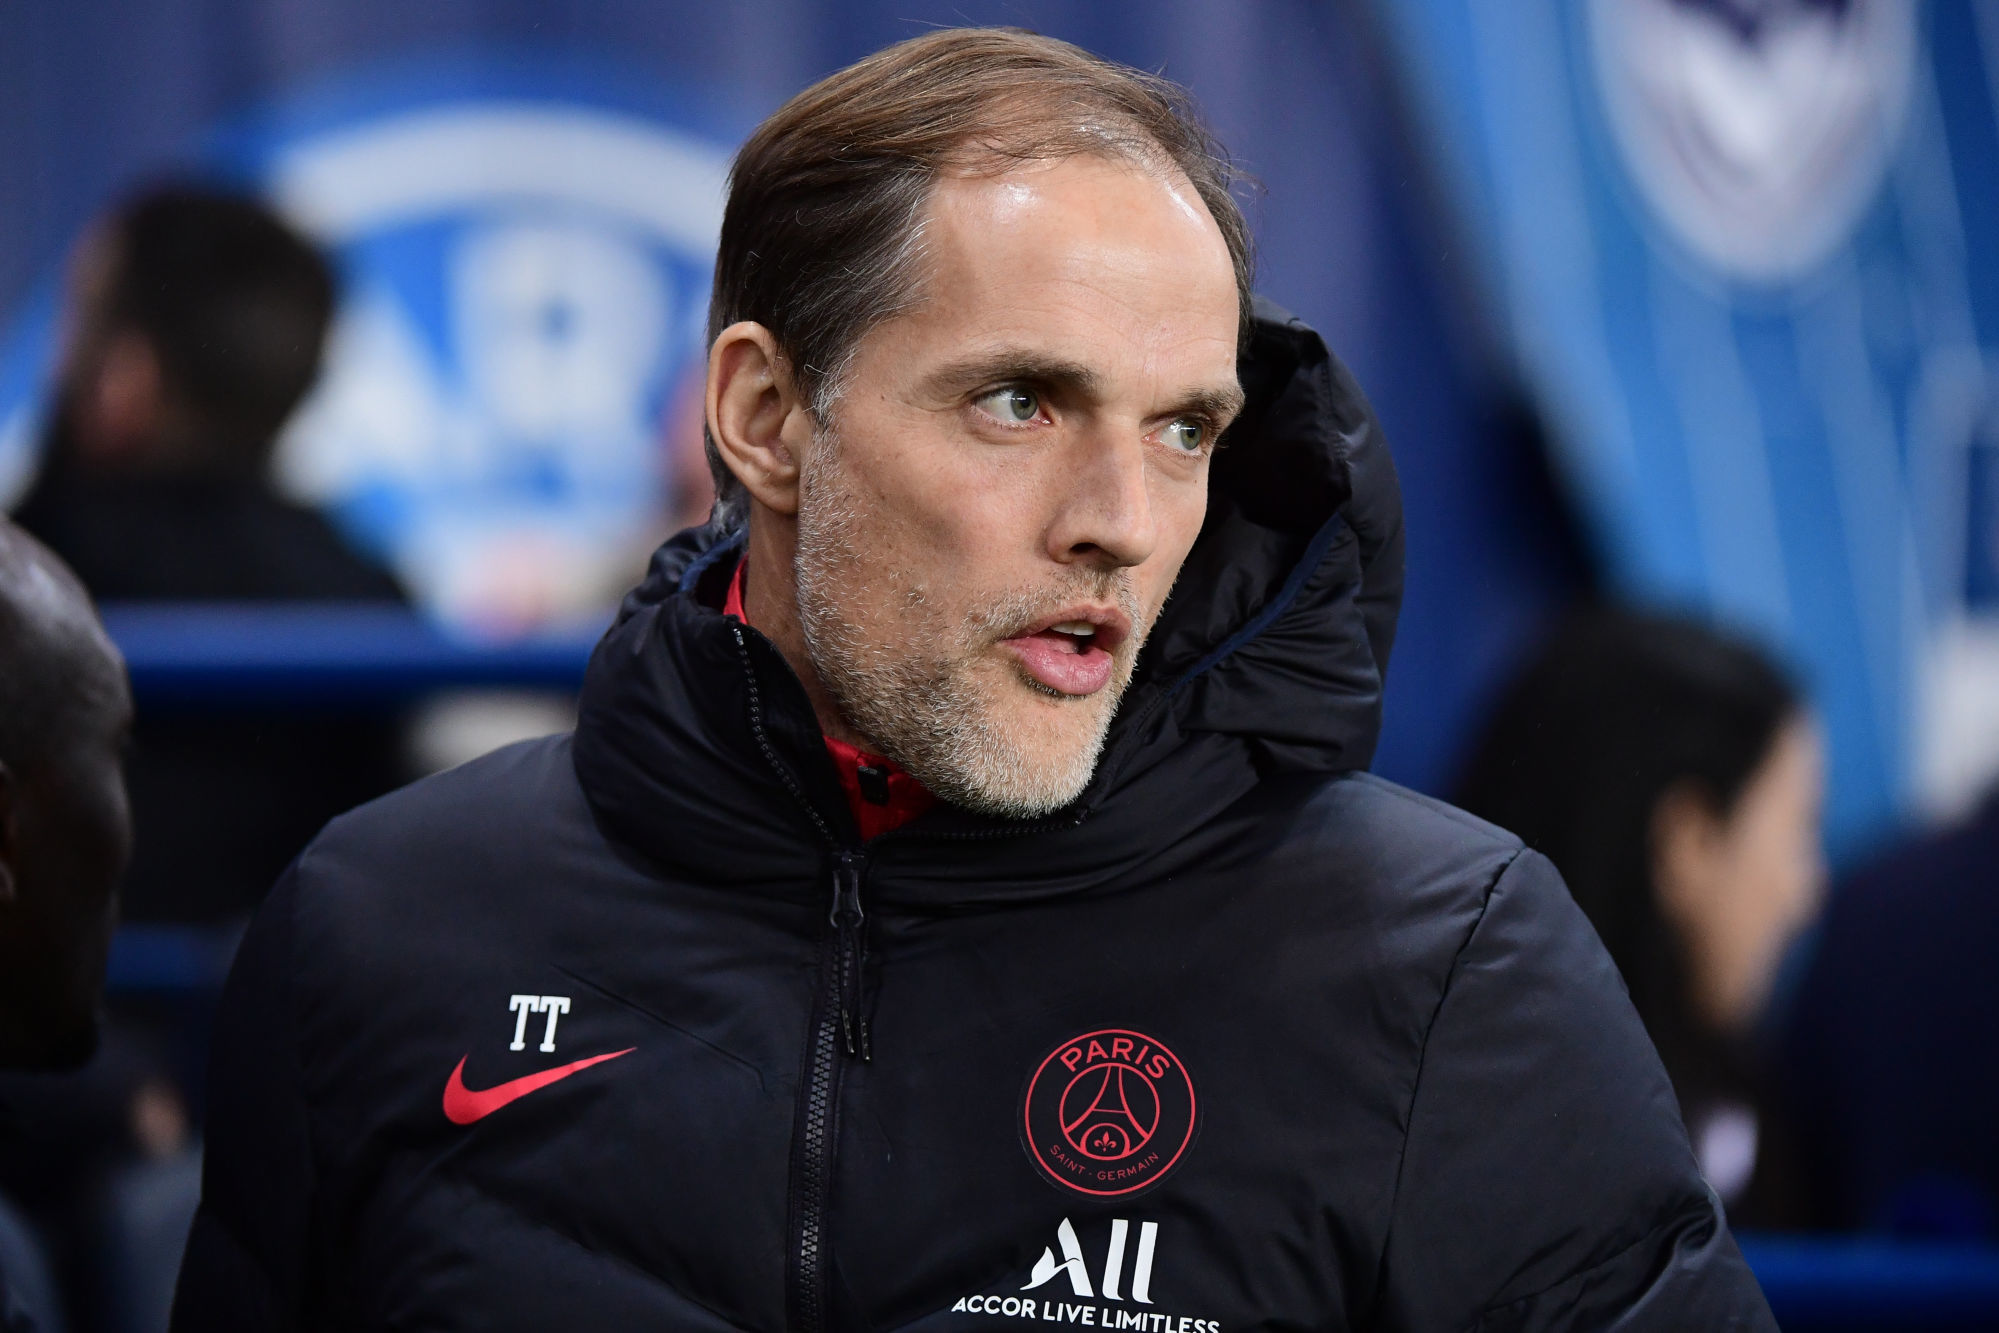 PSG coach Thomas TUCHEL during the Ligue 1 match between Paris Saint-Germain and Girondins Bordeaux at Parc des Princes on February 23, 2020 in Paris, France. (Photo by Dave Winter/Icon Sport) - Thomas TUCHEL - Parc des Princes - Paris (France)